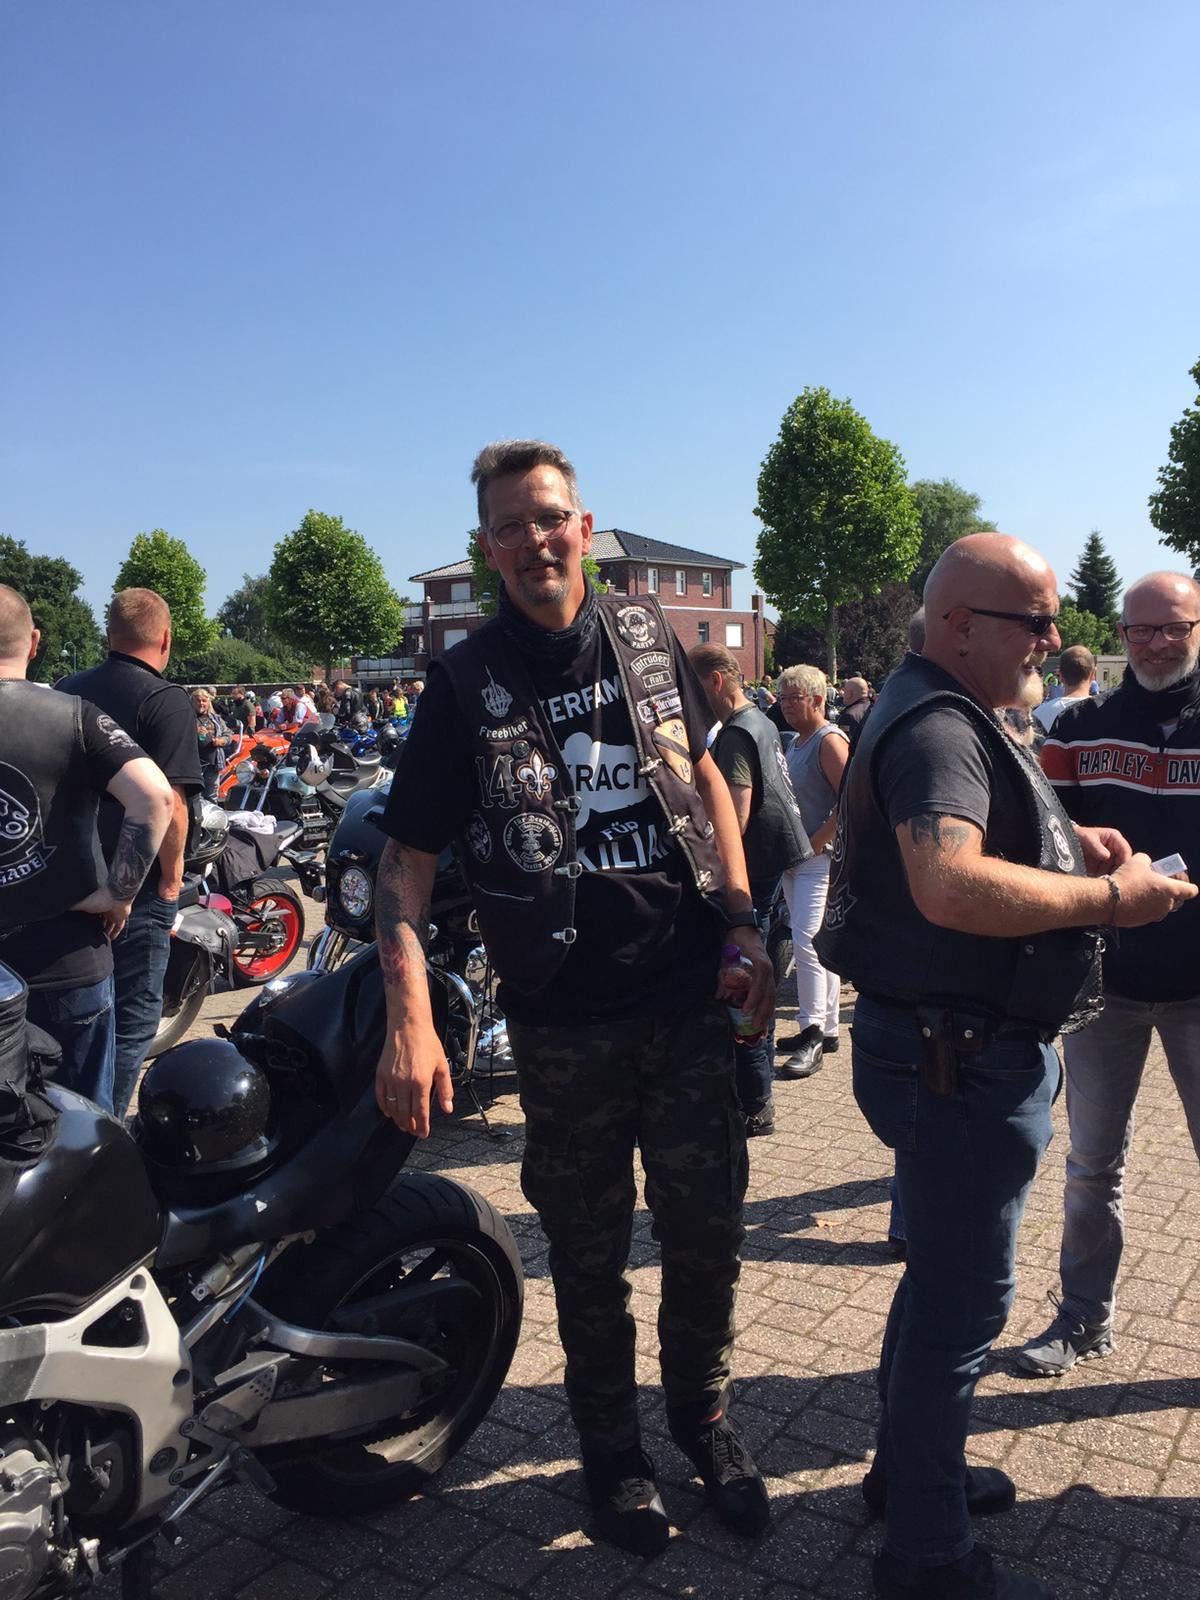 Ralf Pietsch, a biker who helped launch the campaign for Kilian. (Courtesy ofRalf Pietsch)